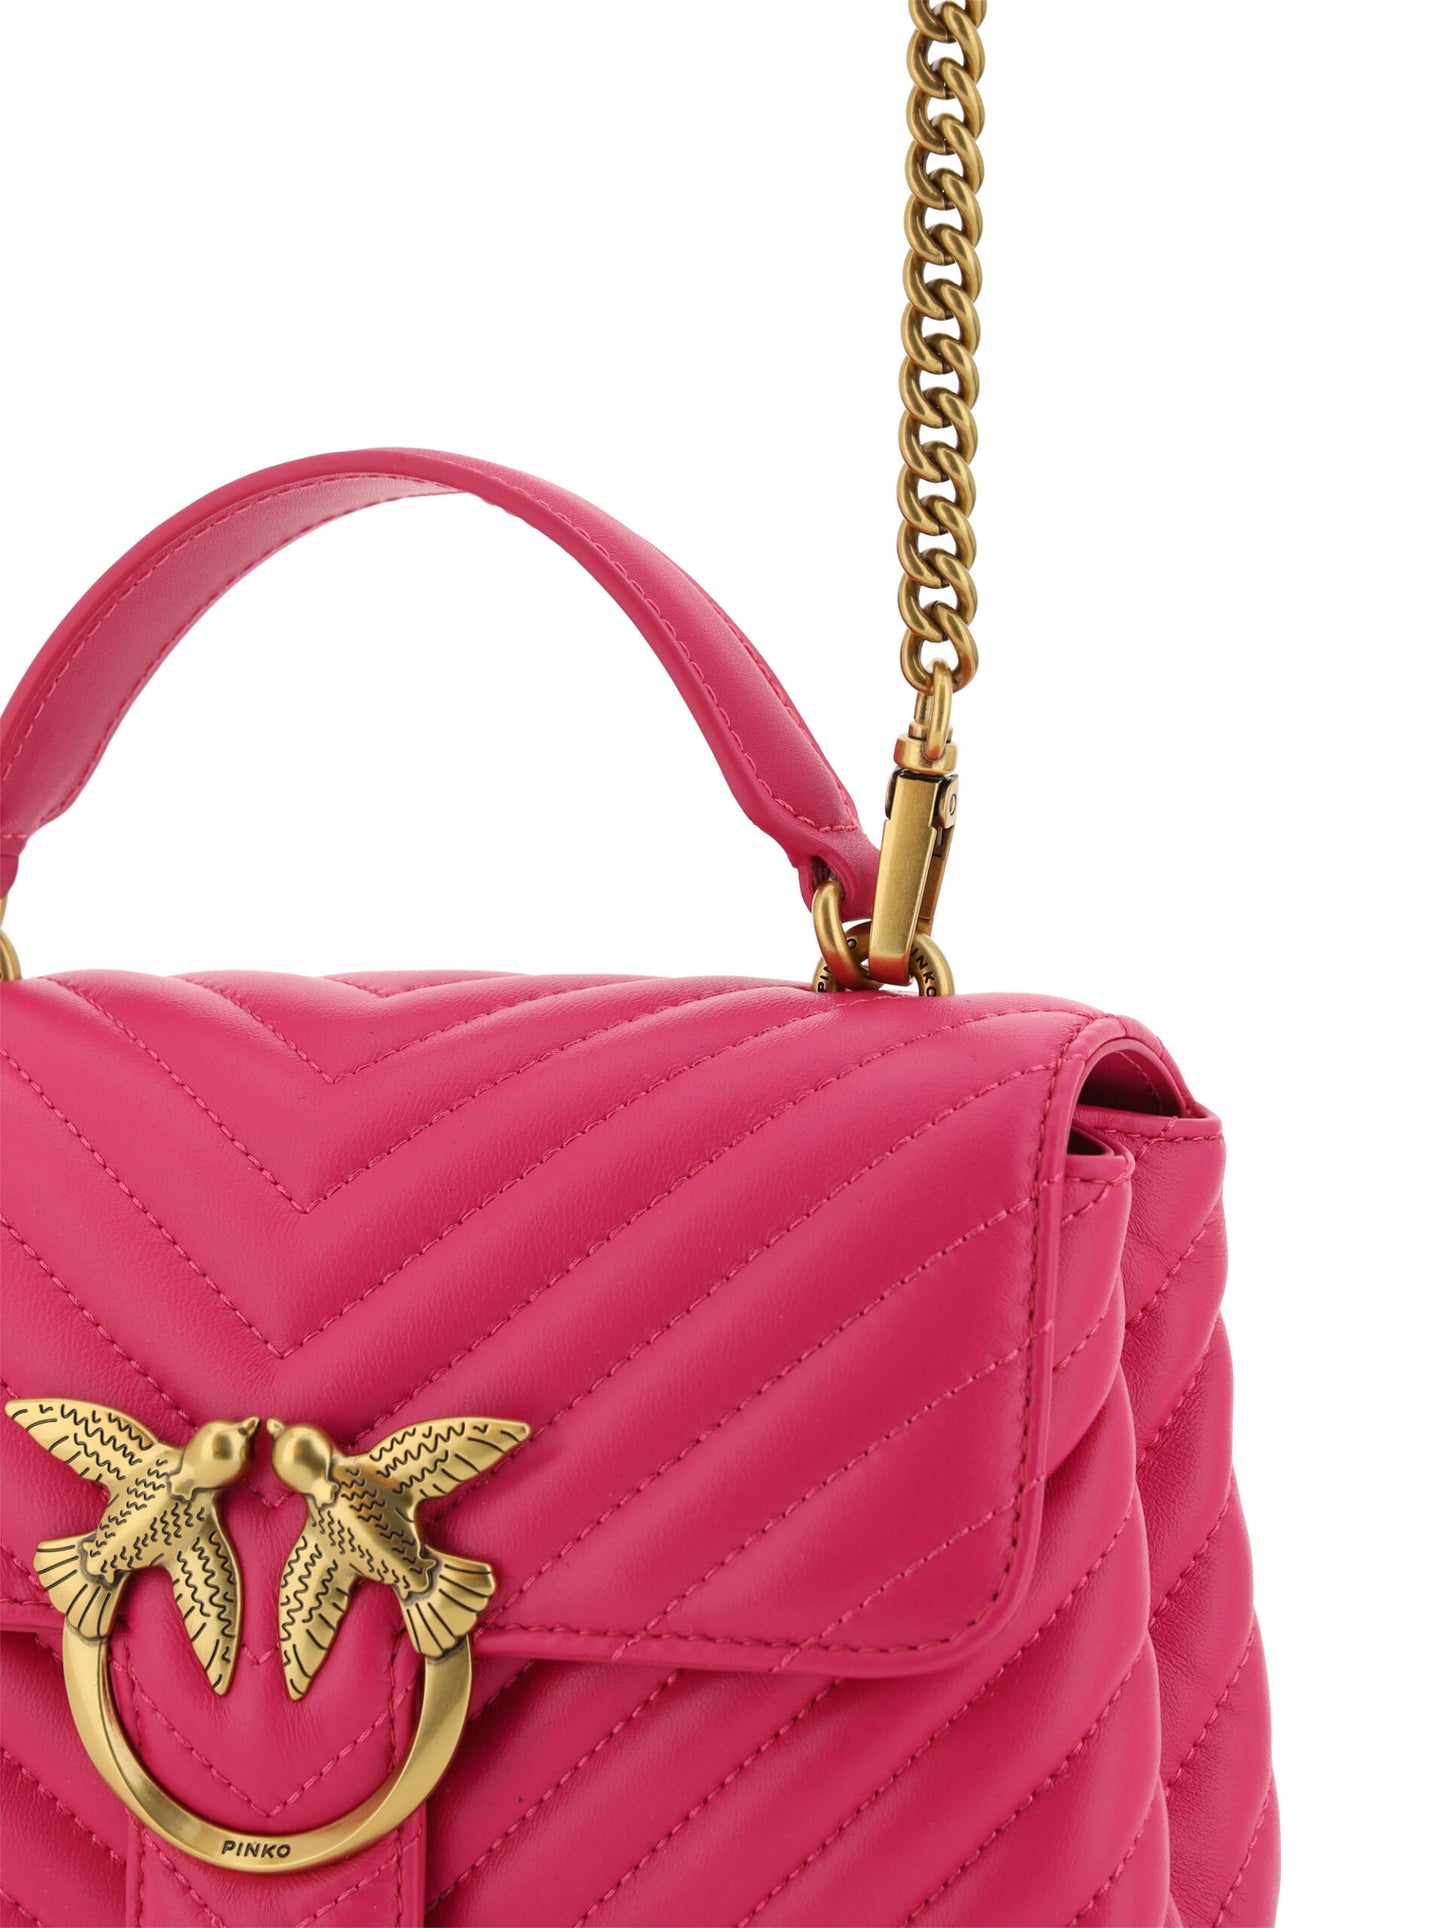 Chic Pink Quilted Leather Mini Handbag